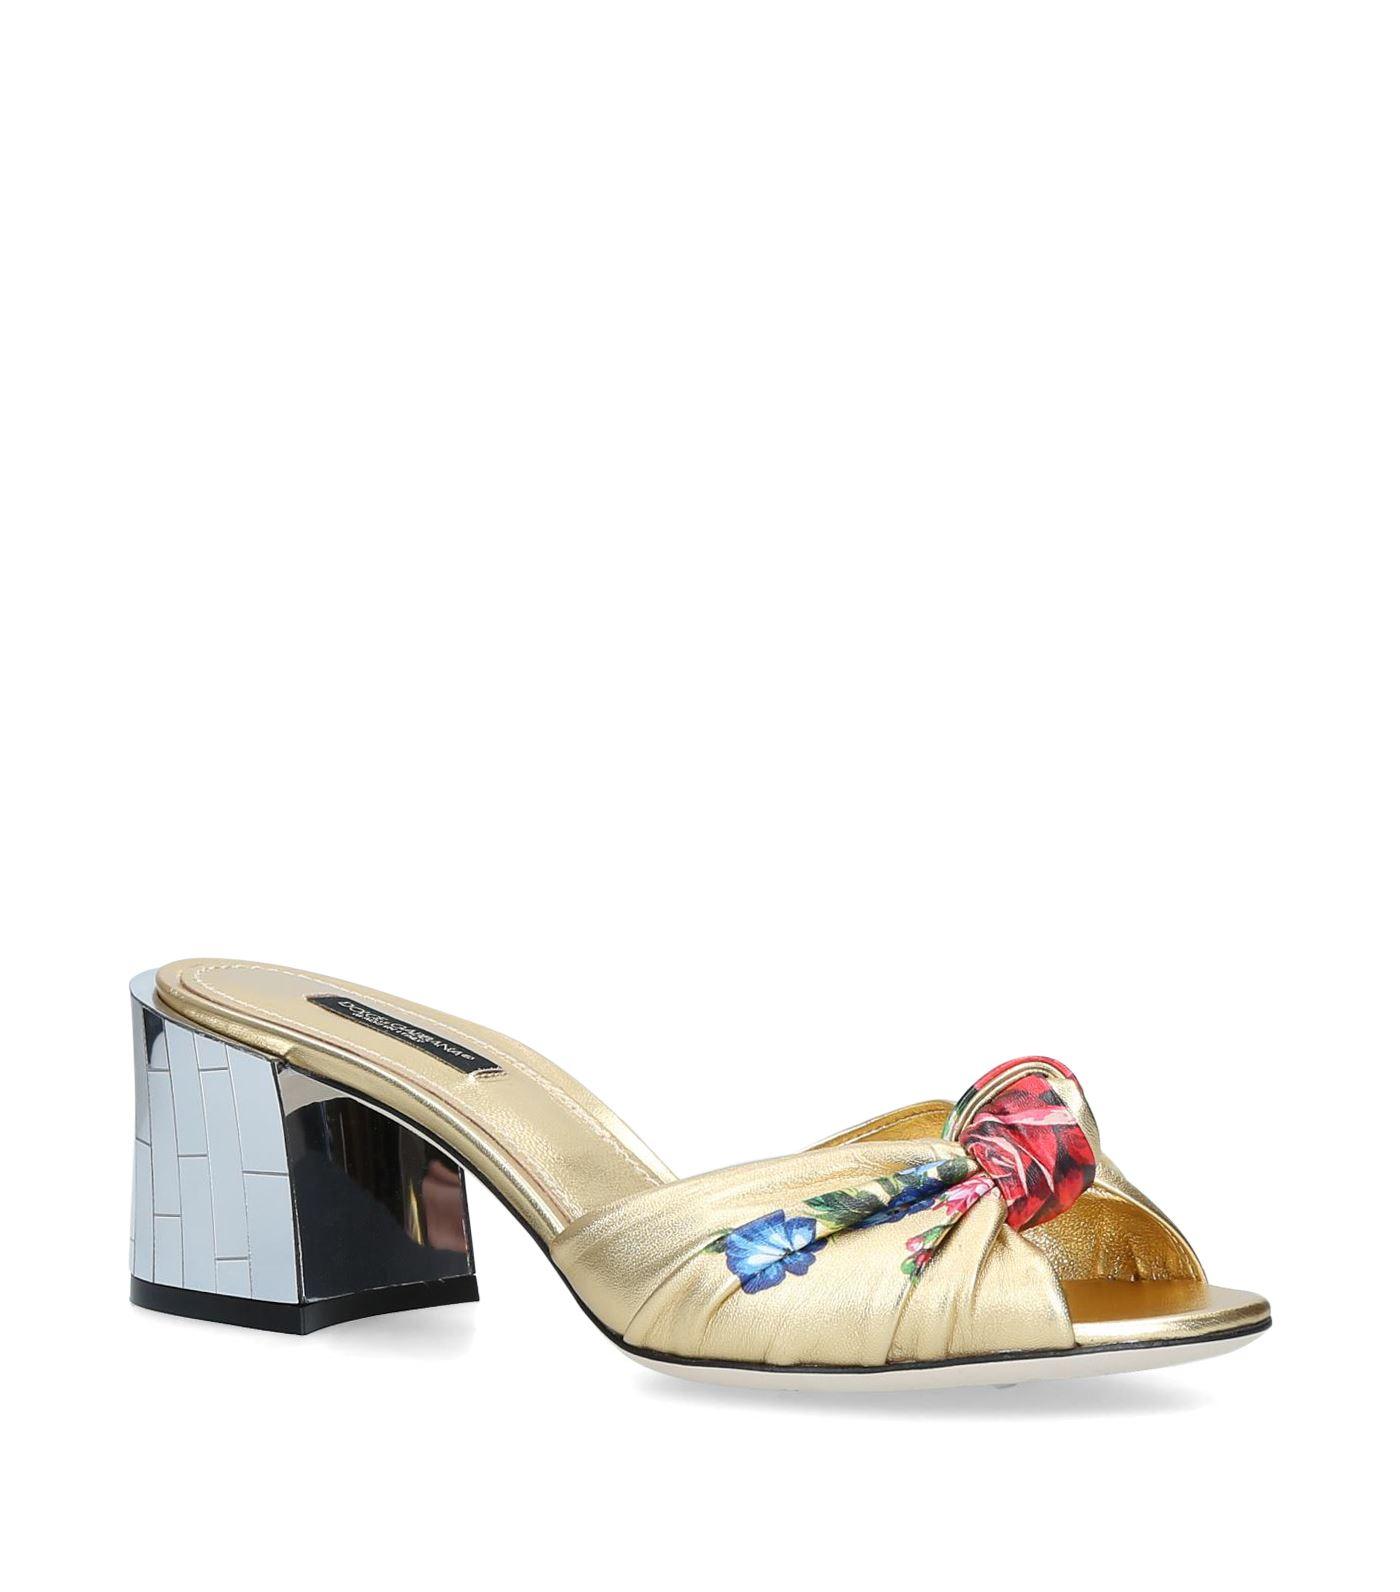 Dolce & Gabbana Leather Floral Sandals in Gold (Metallic) - Lyst